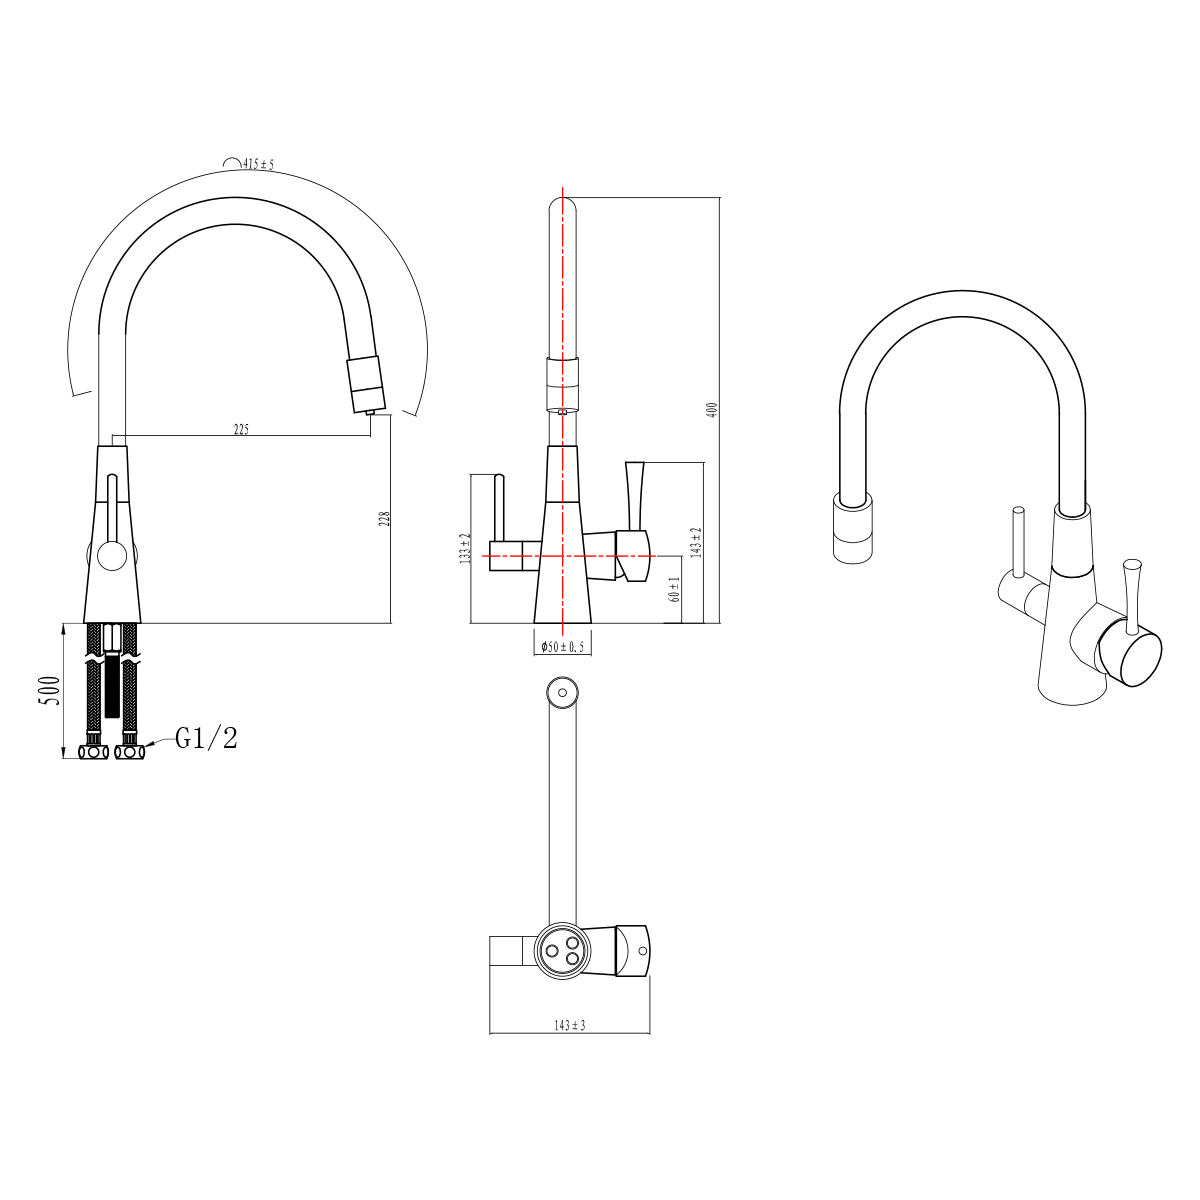 LM3075BN Kitchen faucet 
with connection to drinking 
water supply